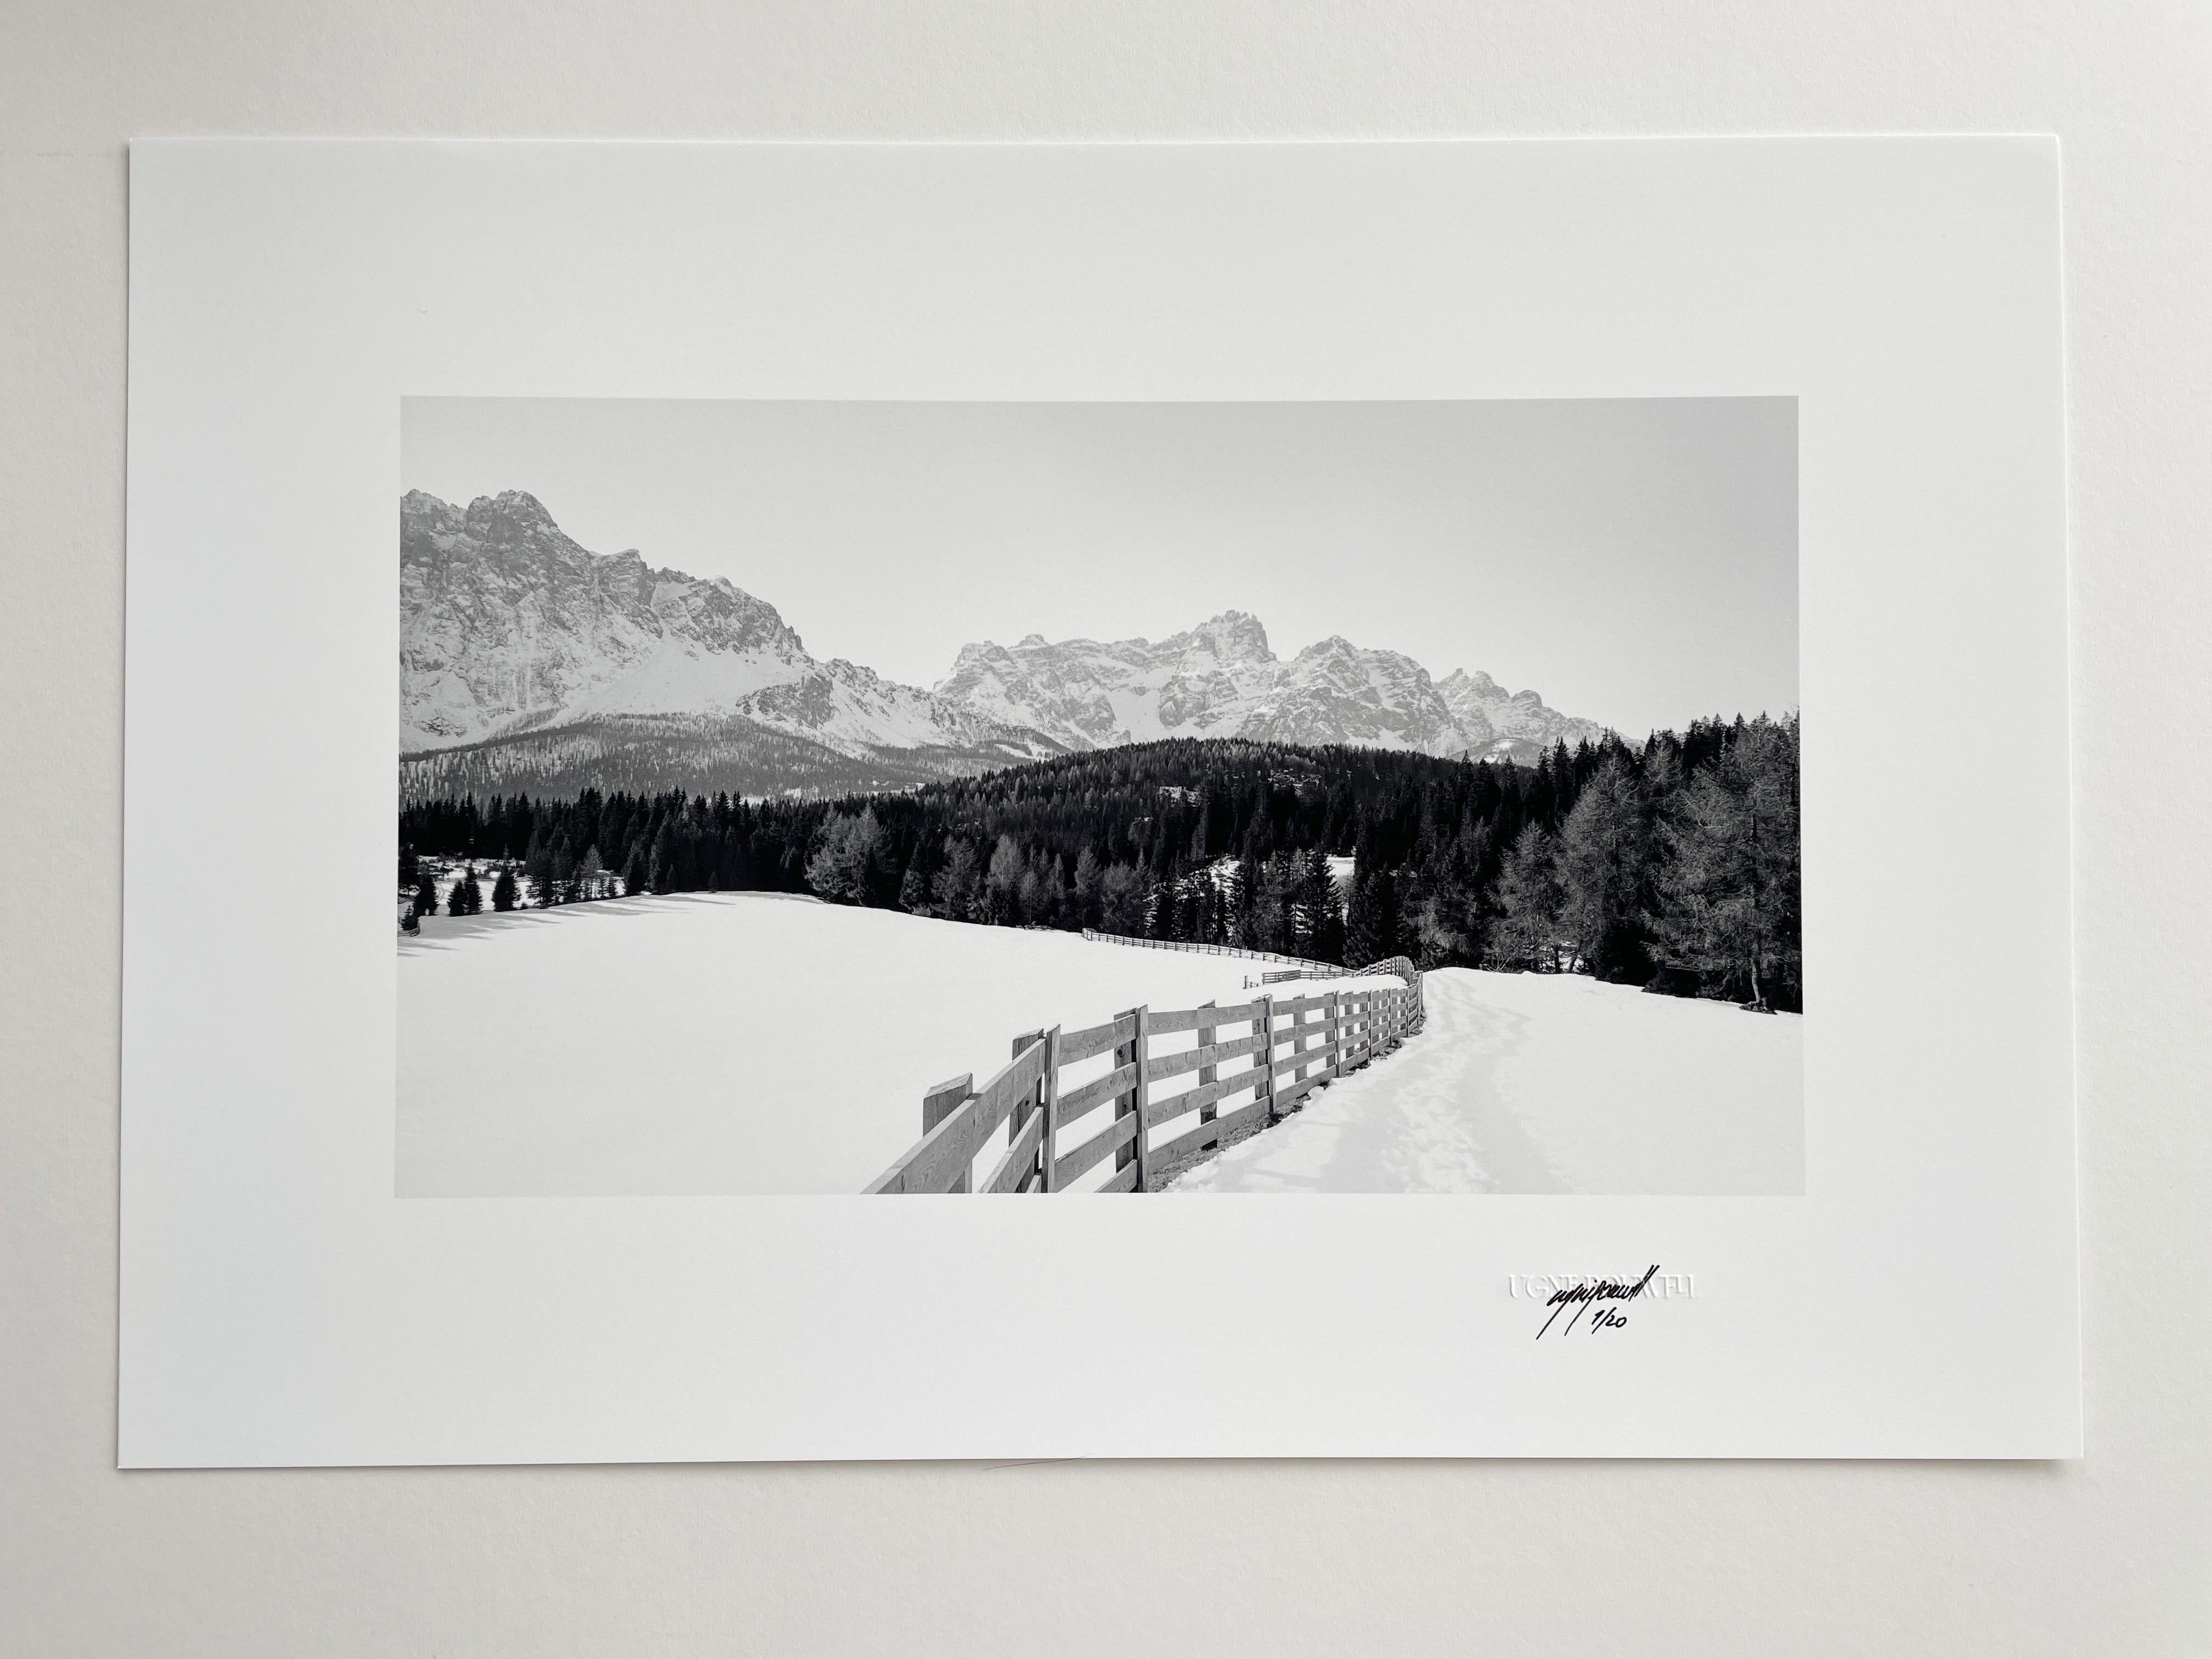 Dolomites No.2, 2024

It is a black and white film photograph of Dolomite mountains, made using a 4x5 Large format camera Linhof. Ugne Pouwell does all the processing and printing in the studio.

From a limited edition of 20.

Printed on Hahnemühle